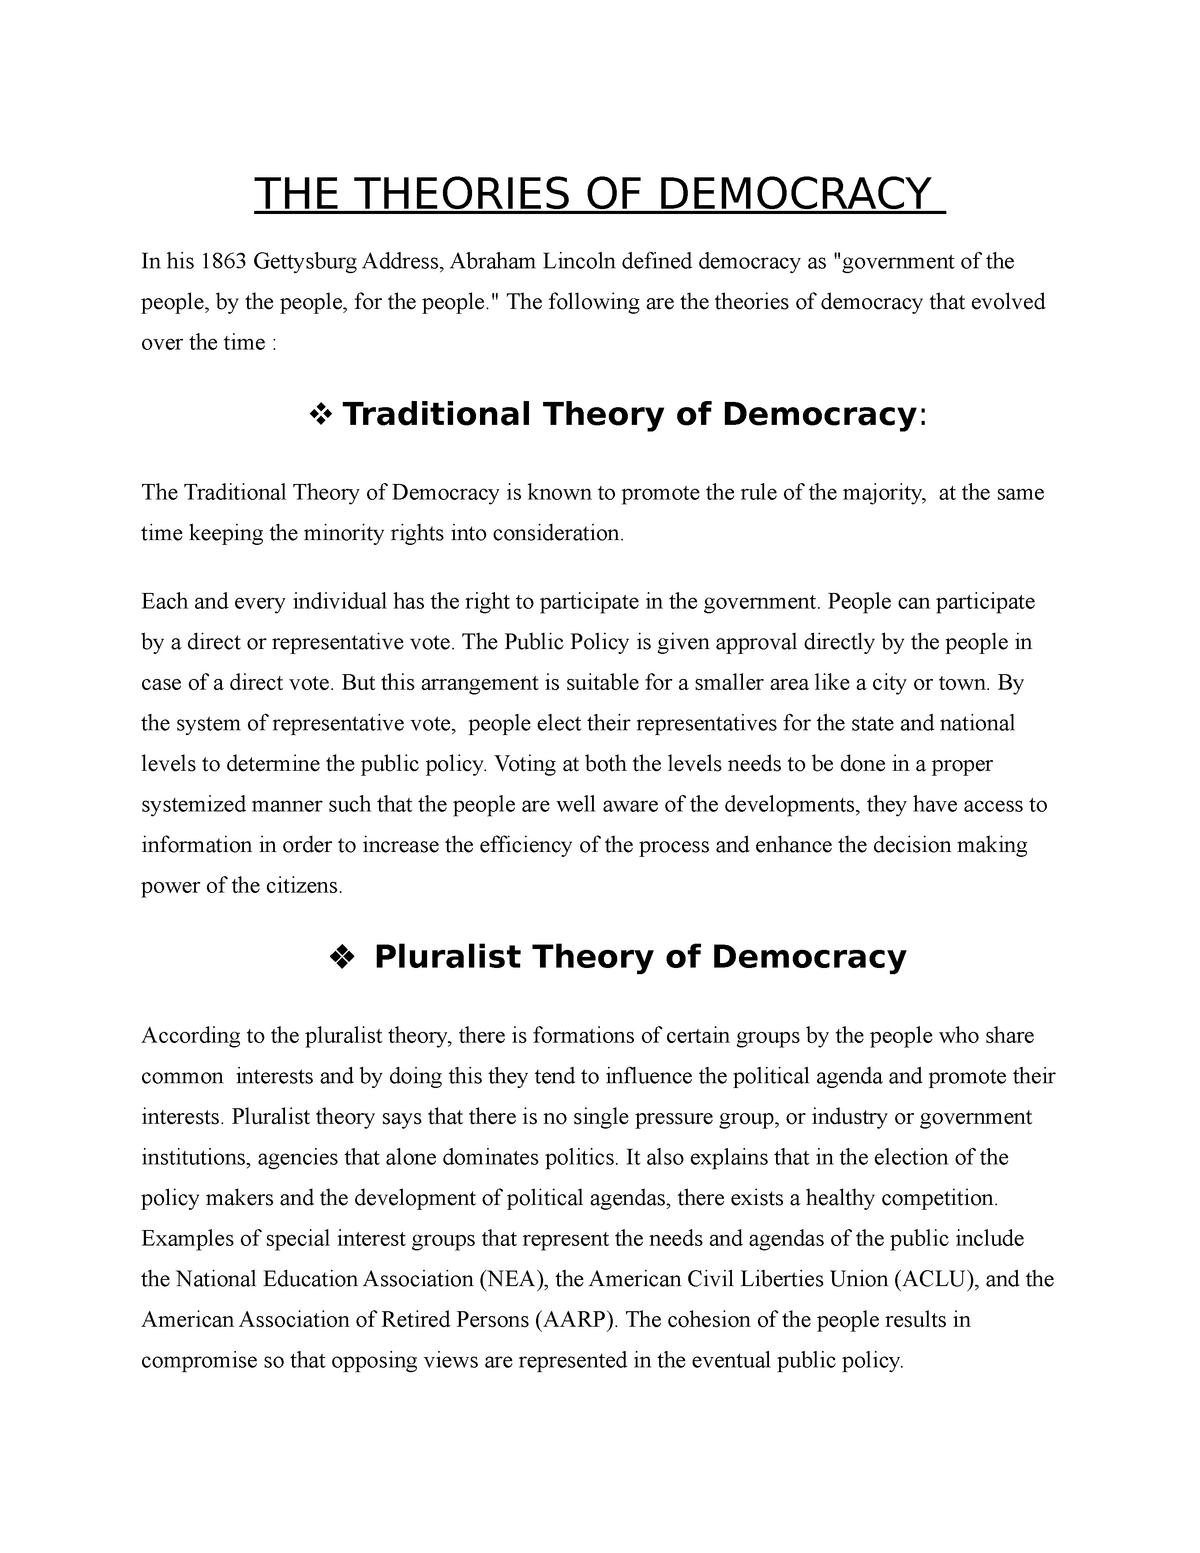 democracy in theory and practice essay pakistan